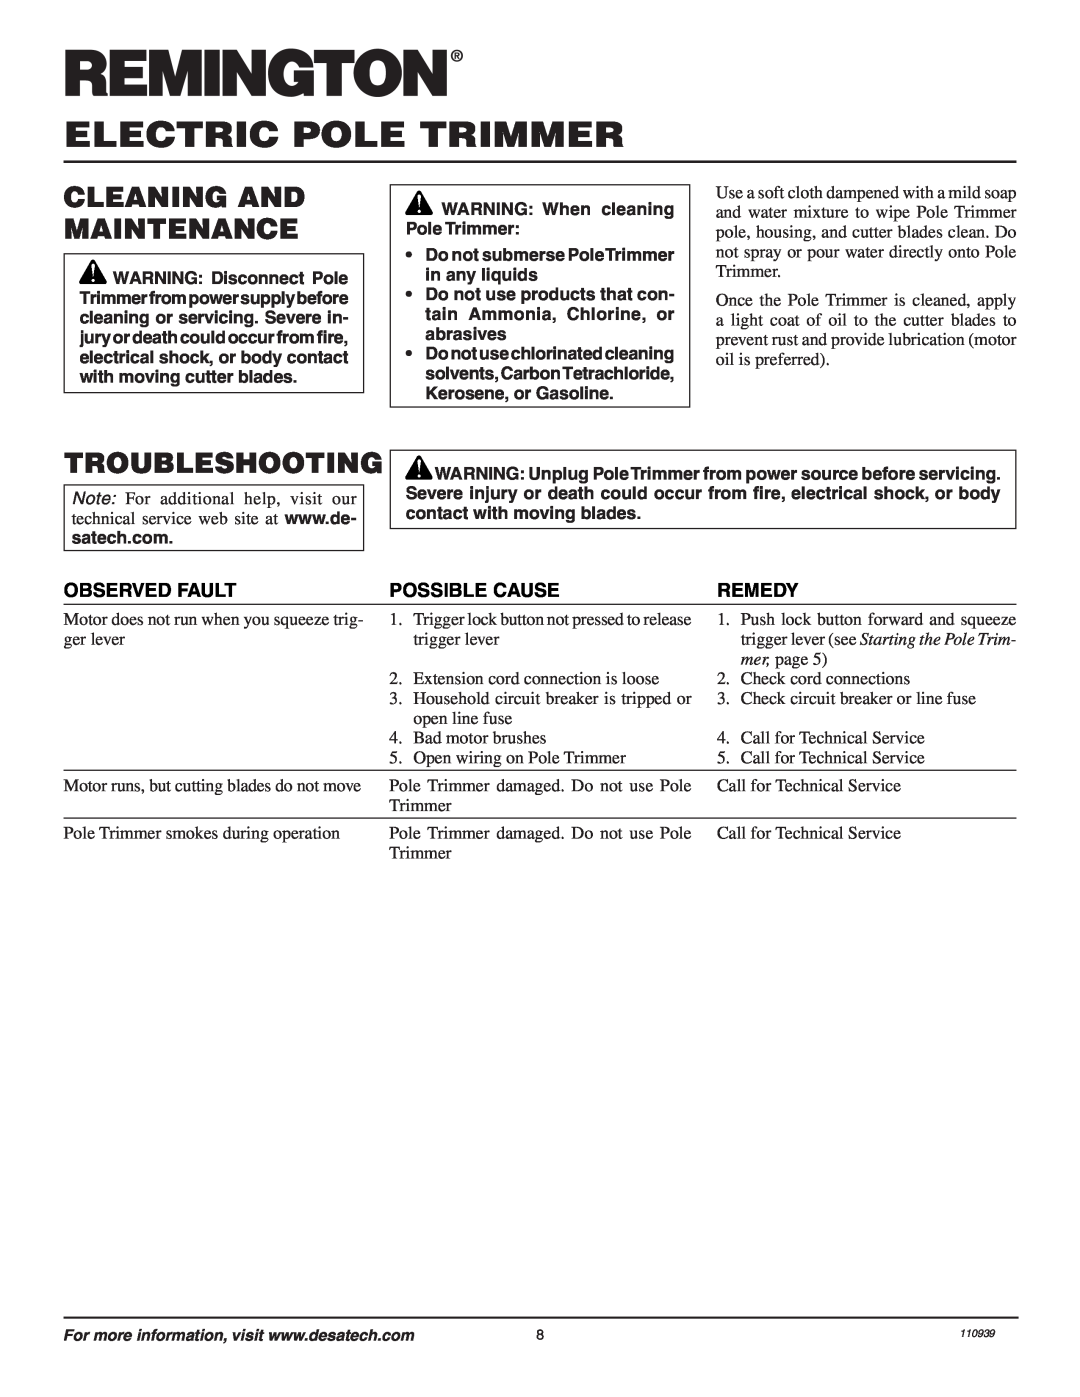 Remington 110946-01A owner manual Cleaning And Maintenance, Troubleshooting, Observed Fault, Possible Cause, Remedy 